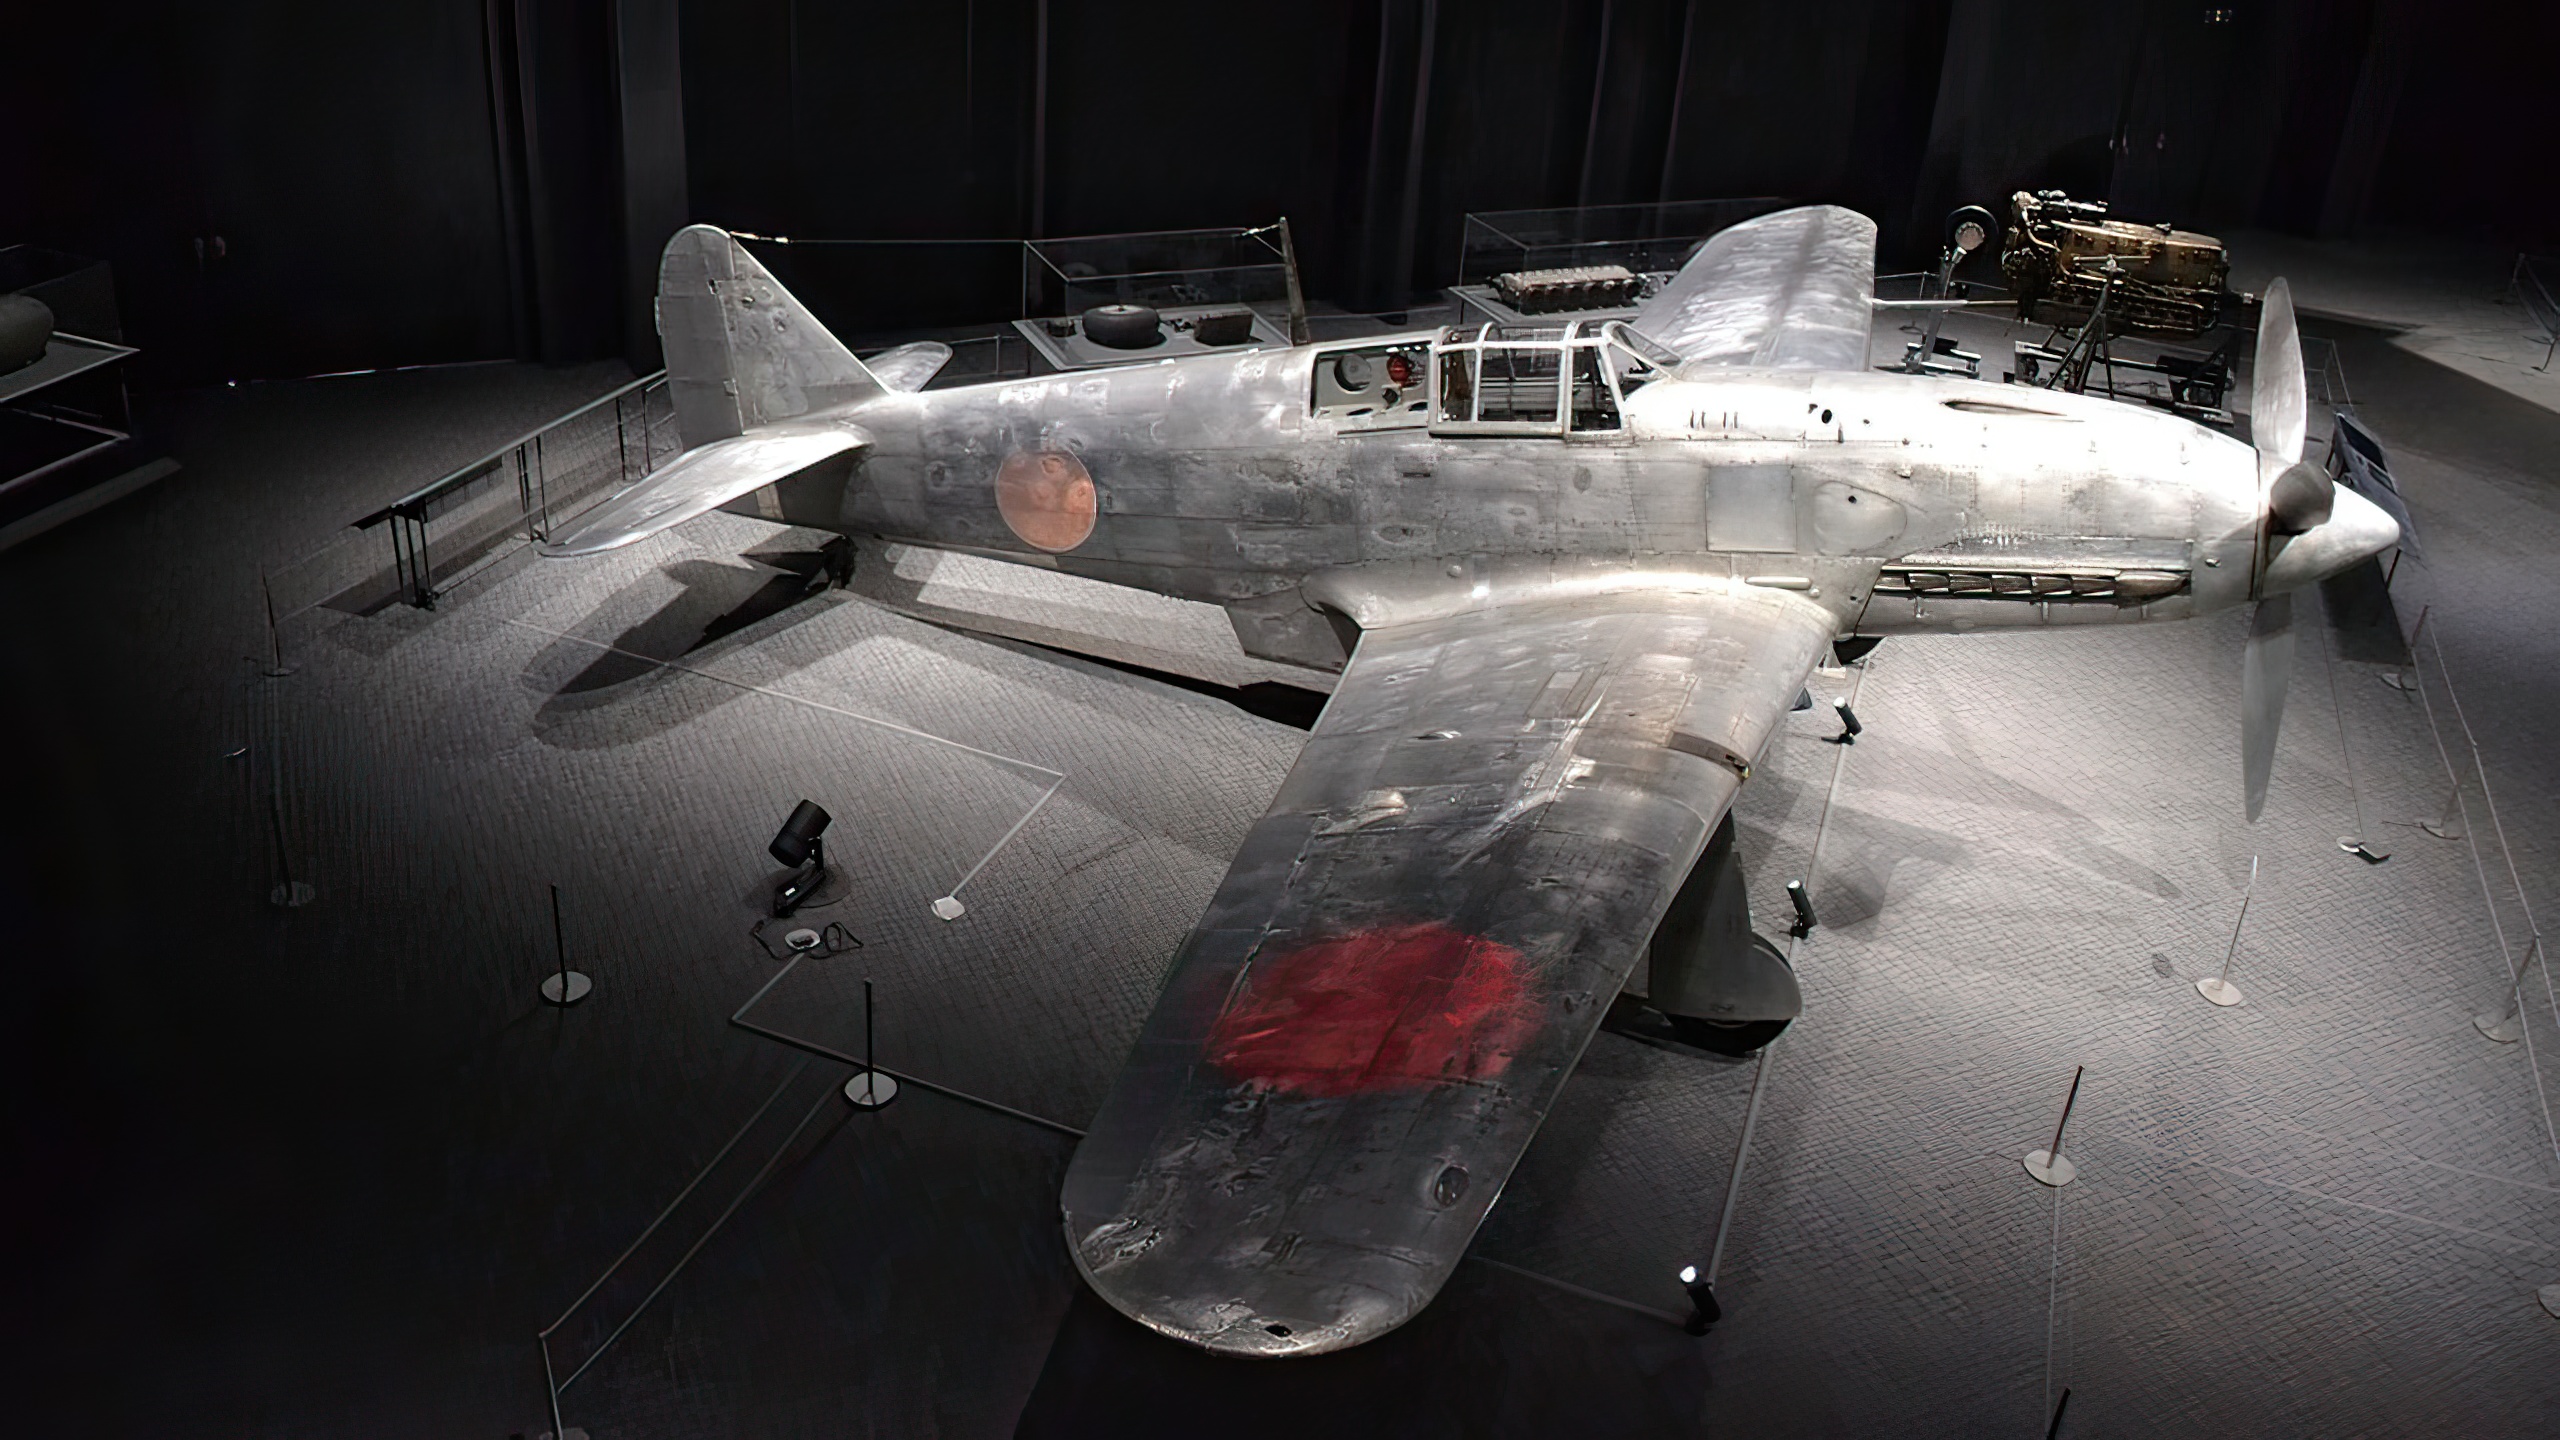 Officially designated as the Army Type 3 Fighter, the Ki-61 was the only mass-produced Japanese WW2 fighter to use an inline engine. Named Hien (flying swallow) the type was given the Allied reporting name ‘Tony’